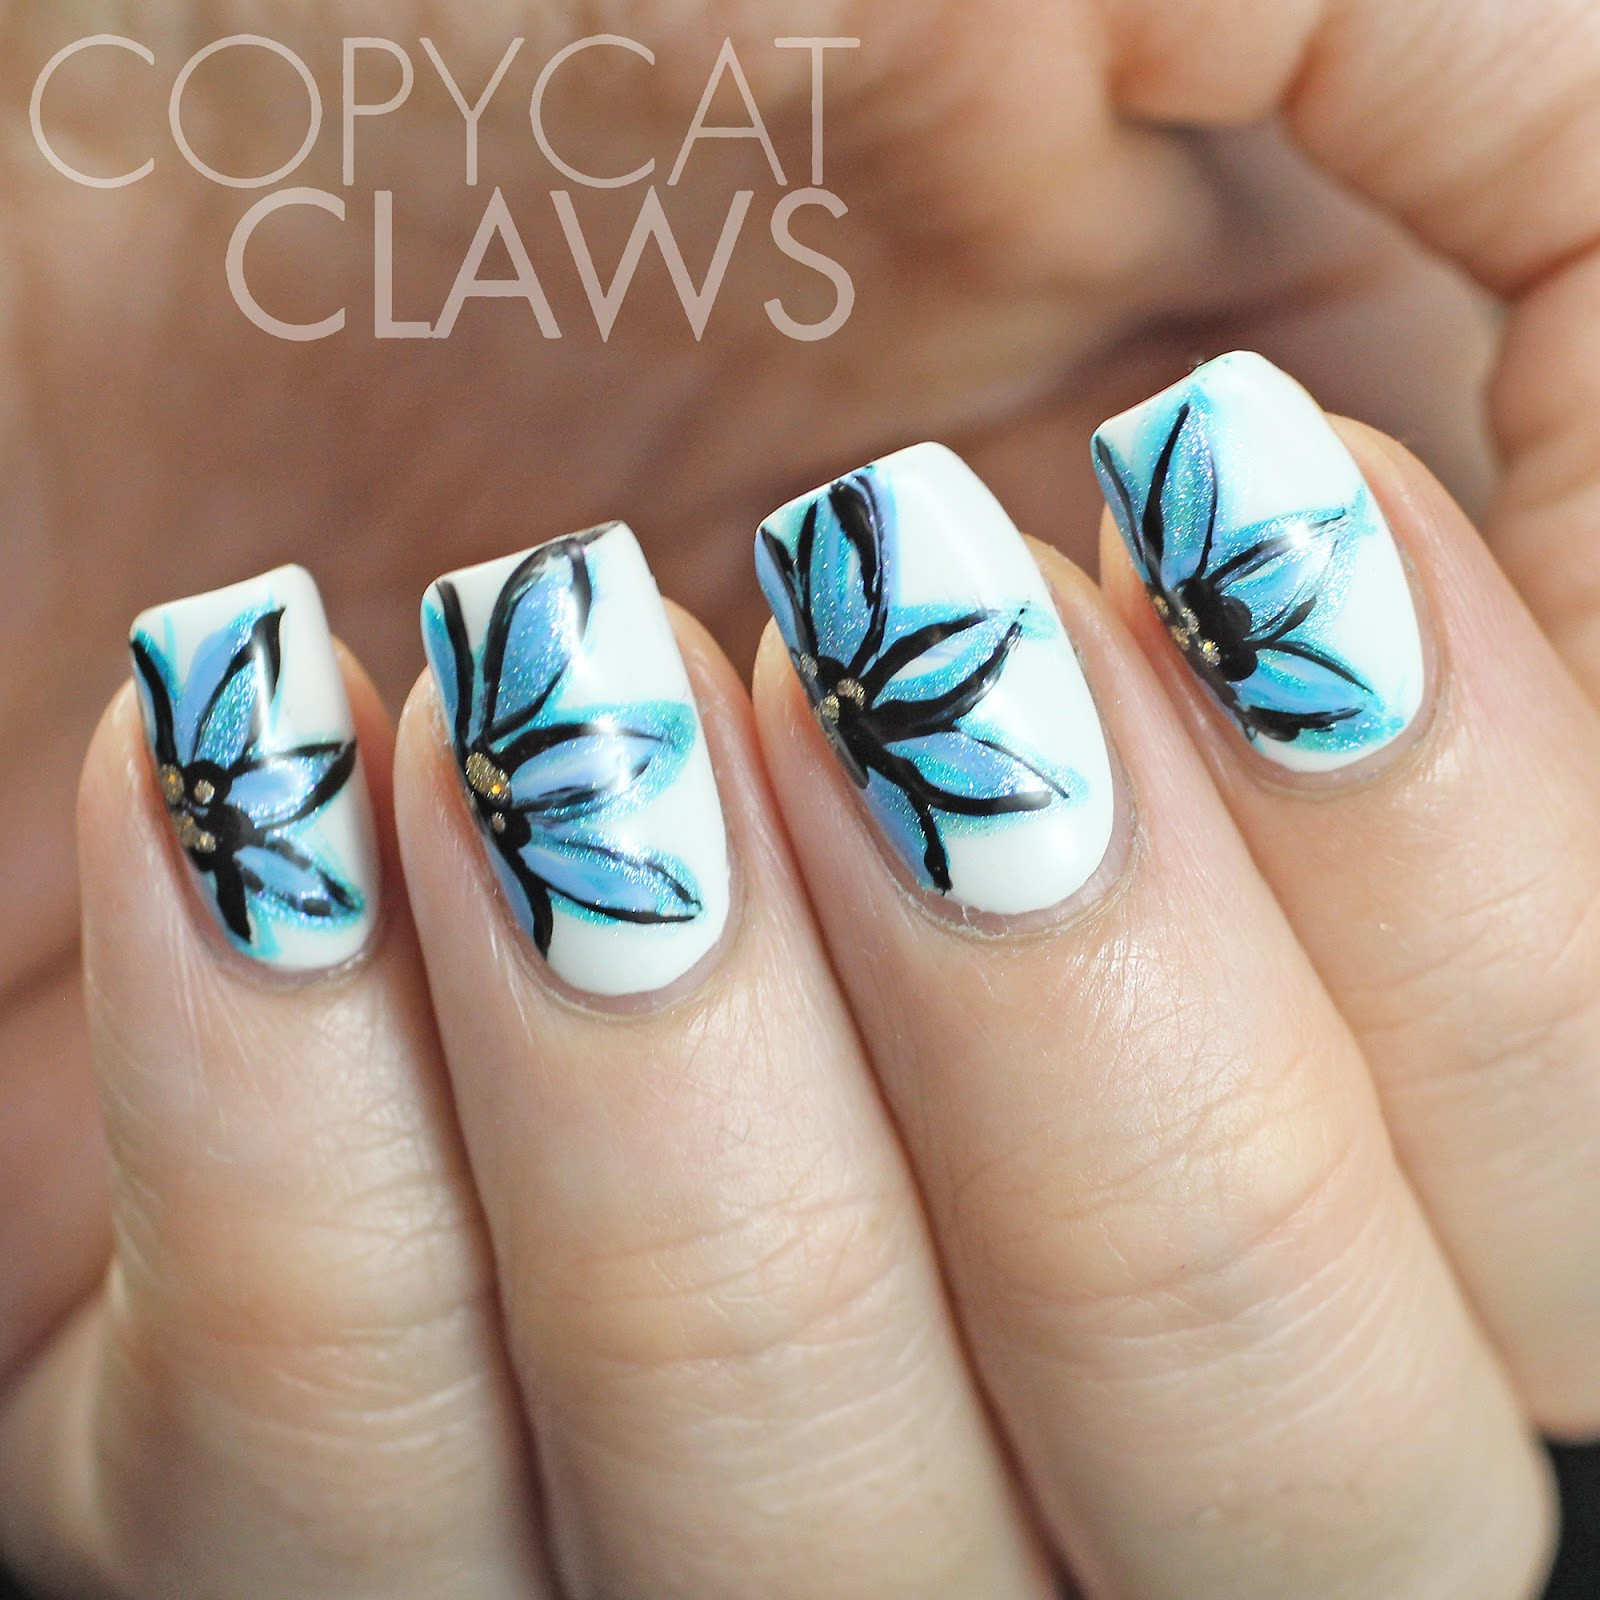 Freehand Nail Art
 Copycat Claws Freehand Blue Flower Nail Art